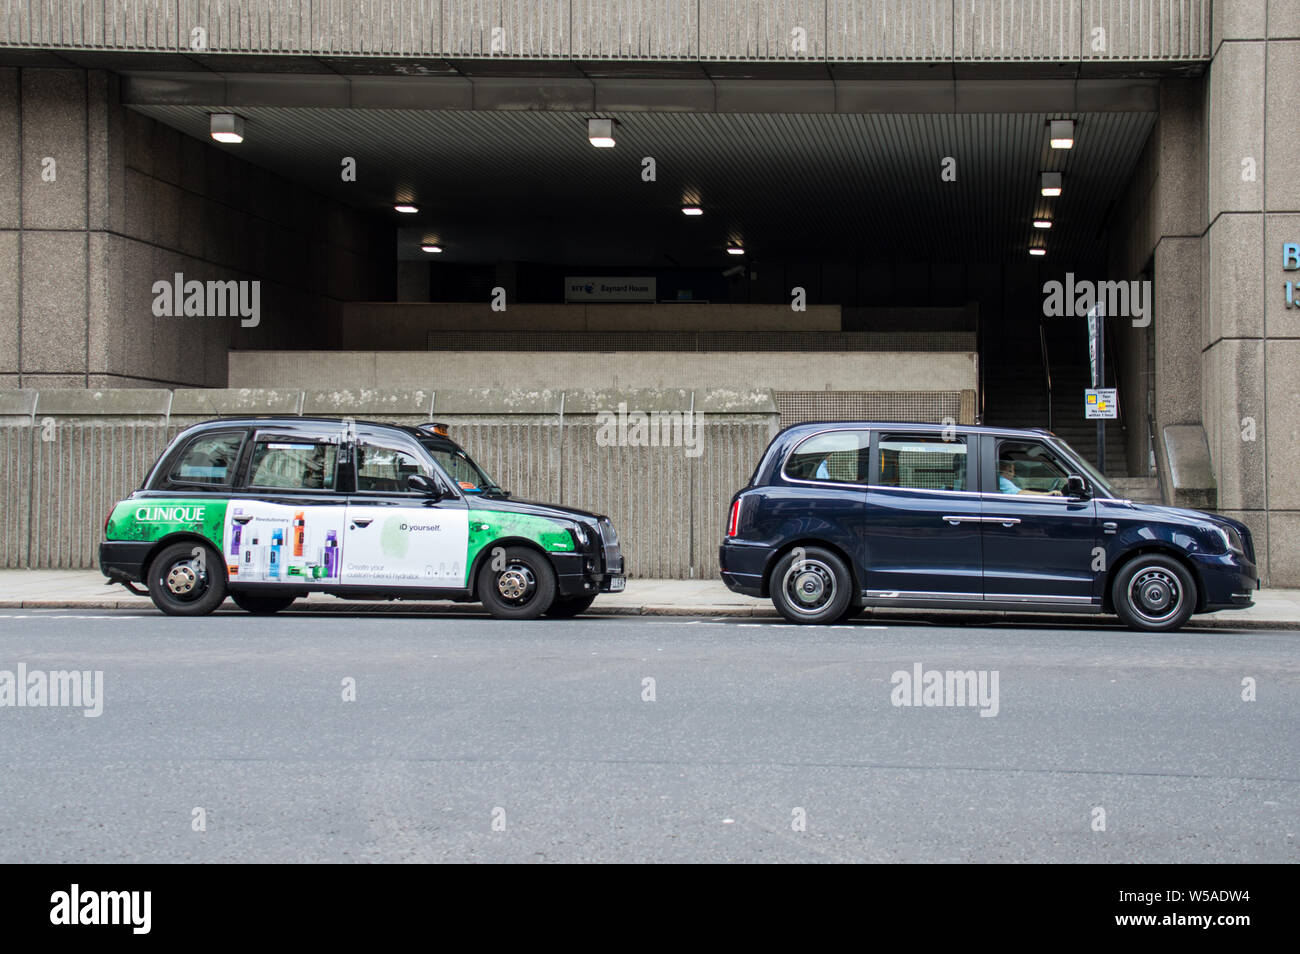 London black cab / Hackney Carriage of 2019 with the new hybrid version made by LEVC as model LEVC TX parked in taxi bay Stock Photo